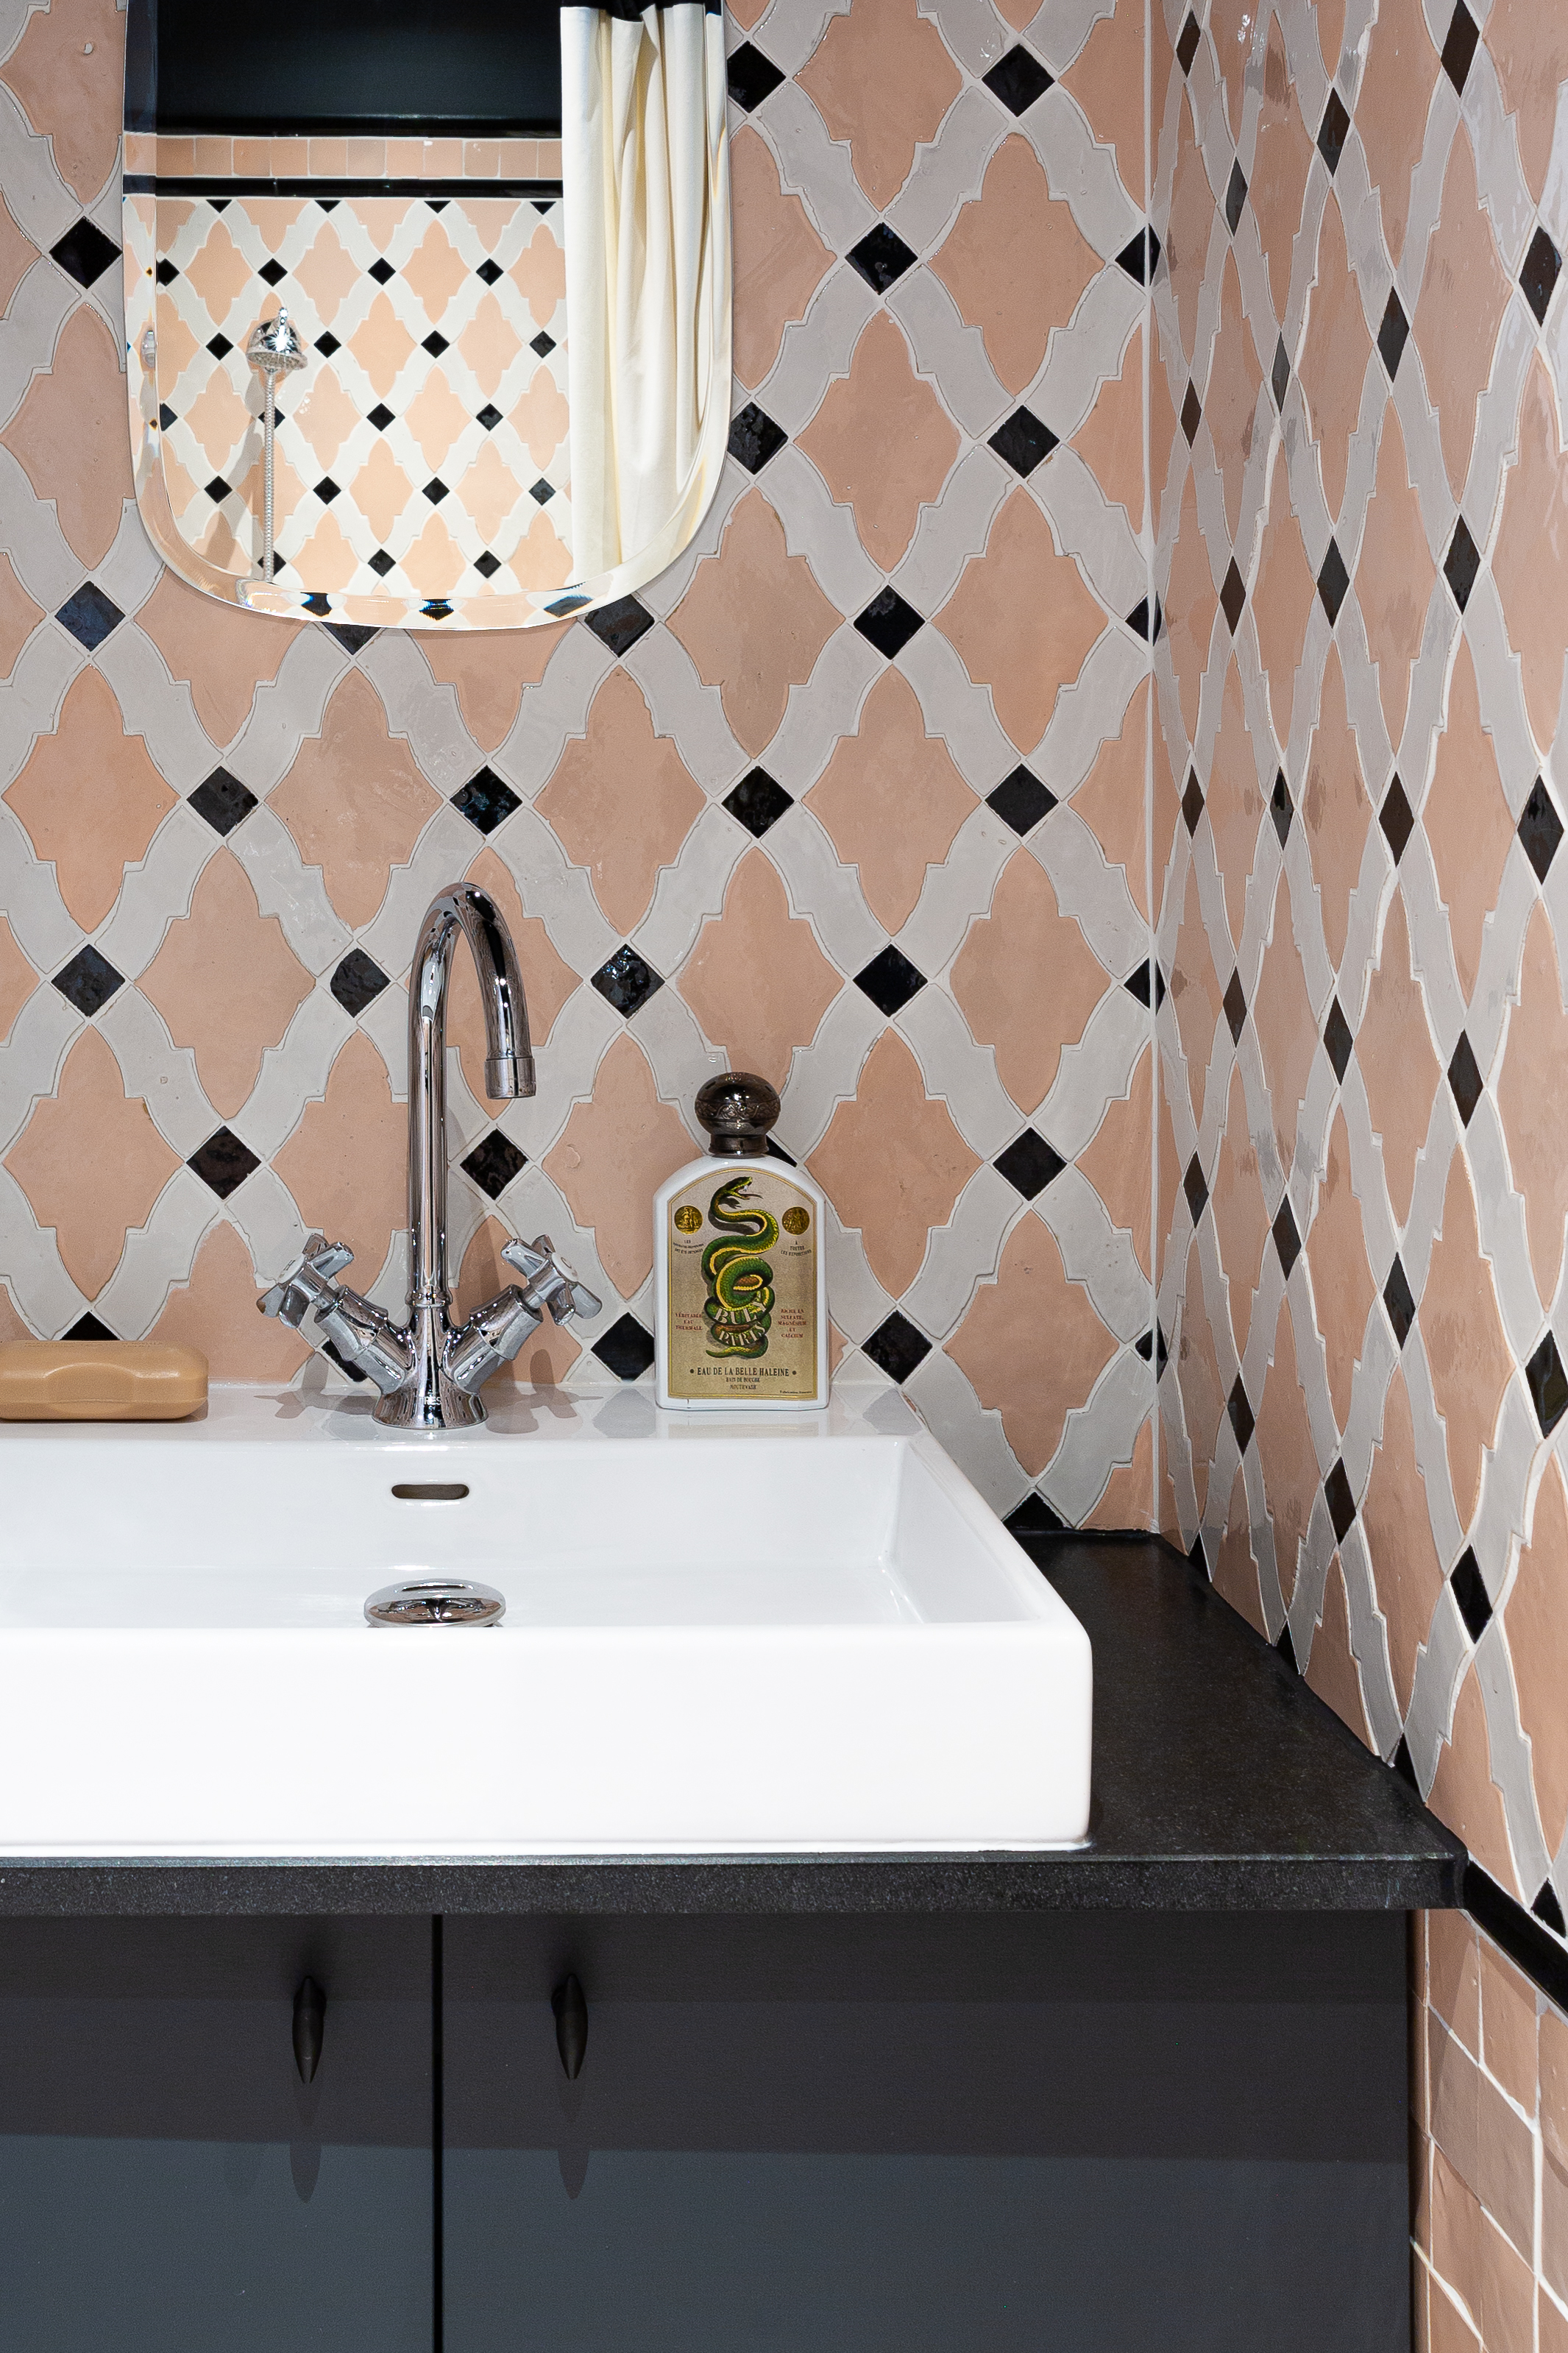 Hall to bathroom: Sabine's Paris apartment remodel by Marianne Evennou. Grégory Timsit photo.